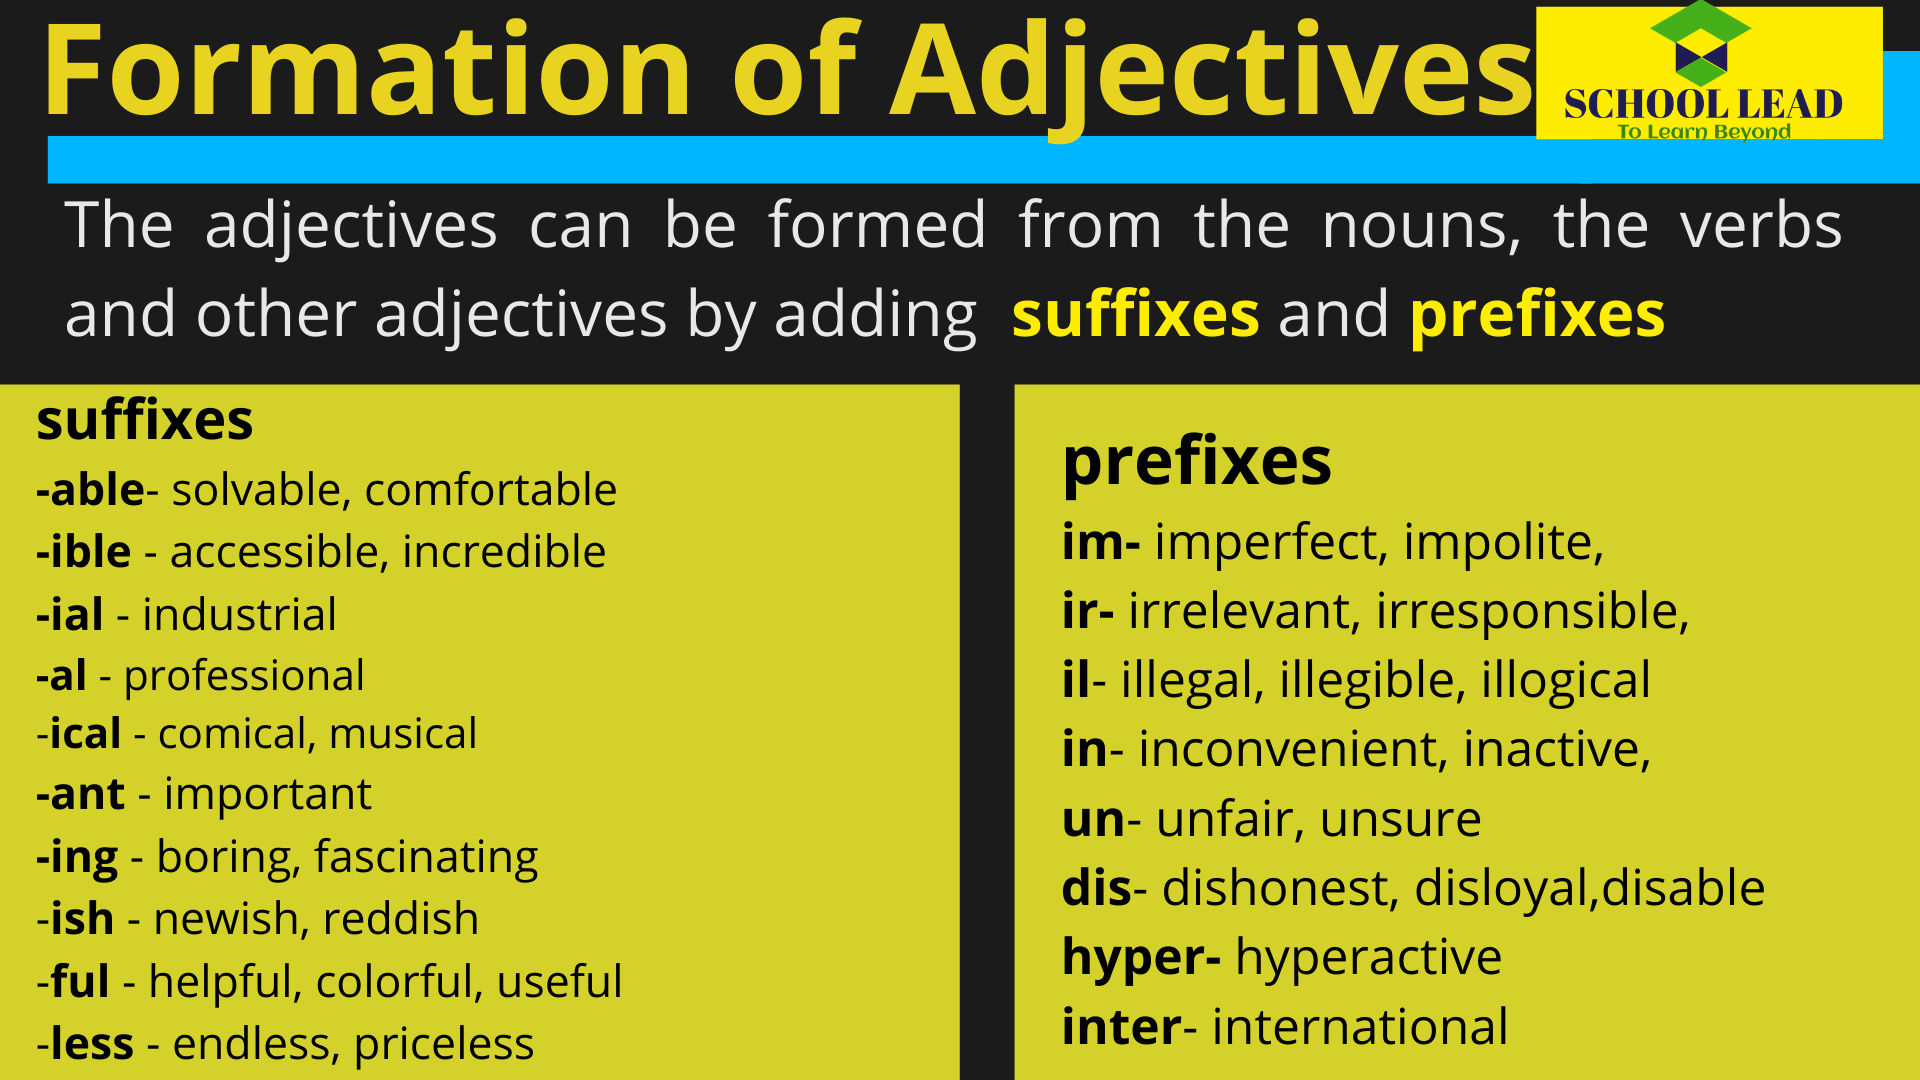 formation-of-adjectives-school-lead